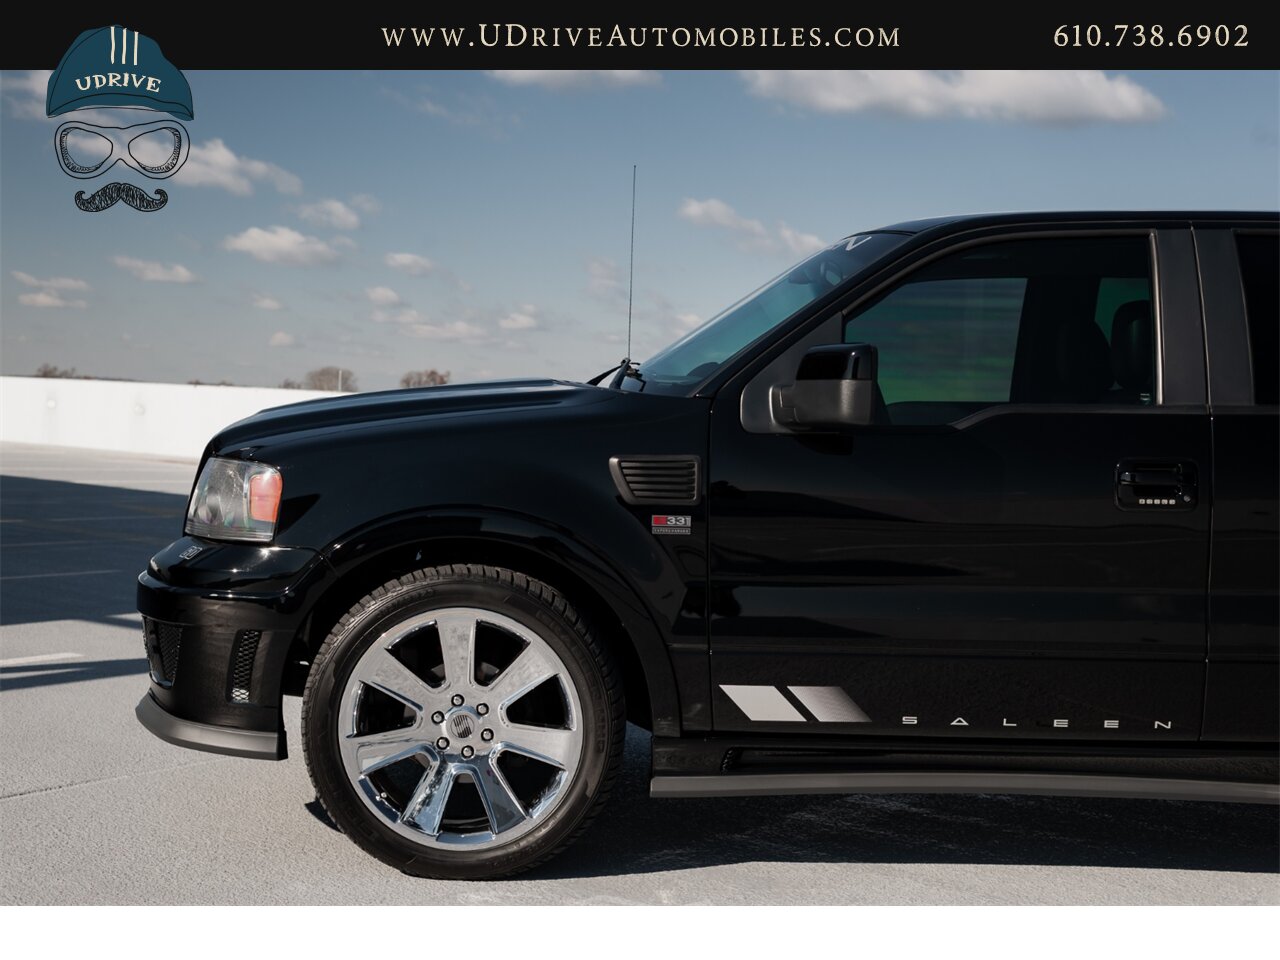 2007 Ford F-150 Saleen S331 Supercharged #60 13k Miles 450HP   - Photo 9 - West Chester, PA 19382